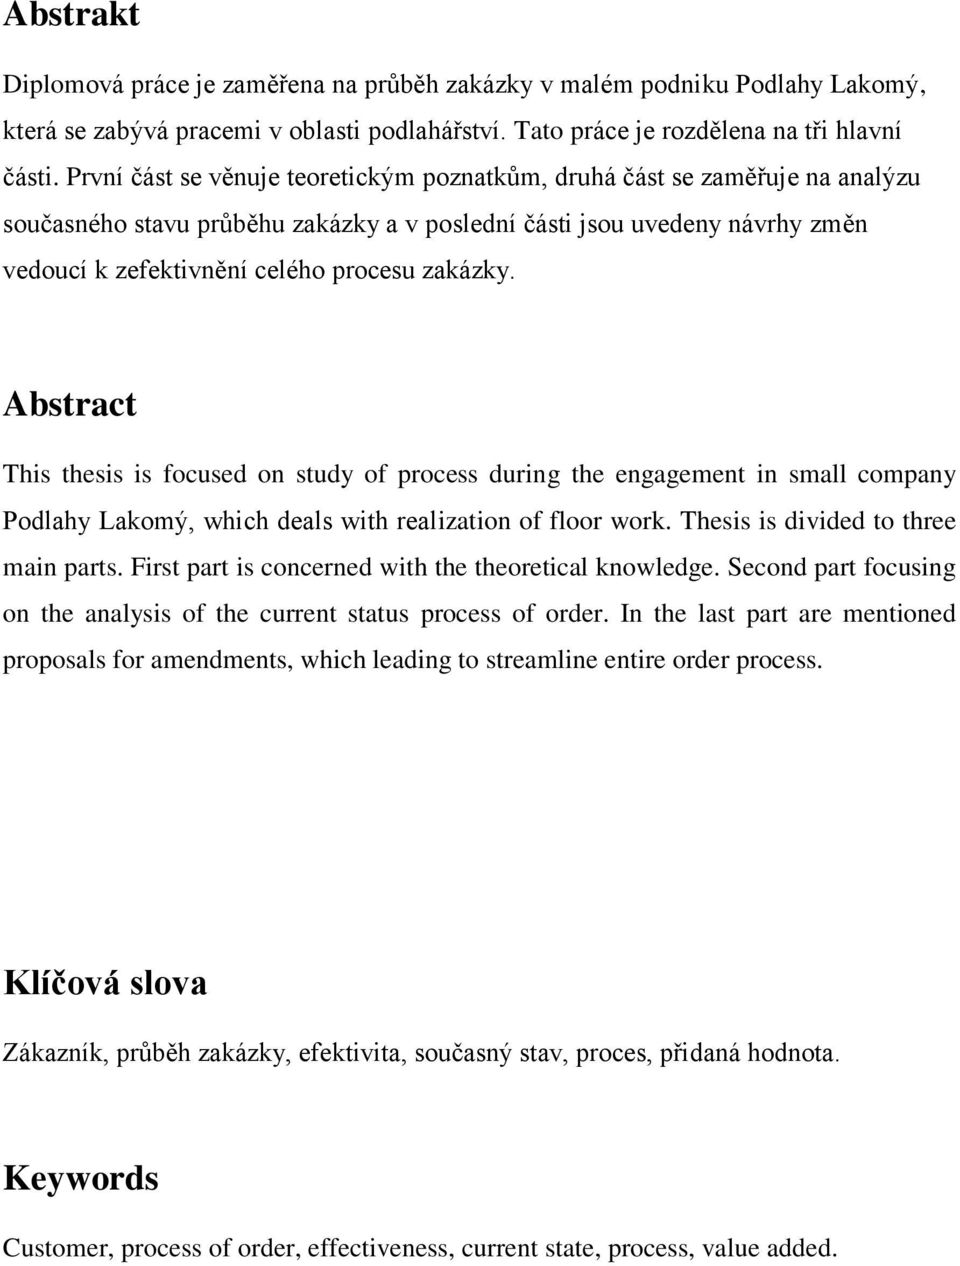 zakázky. Abstract This thesis is focused on study of process during the engagement in small company Podlahy Lakomý, which deals with realization of floor work. Thesis is divided to three main parts.